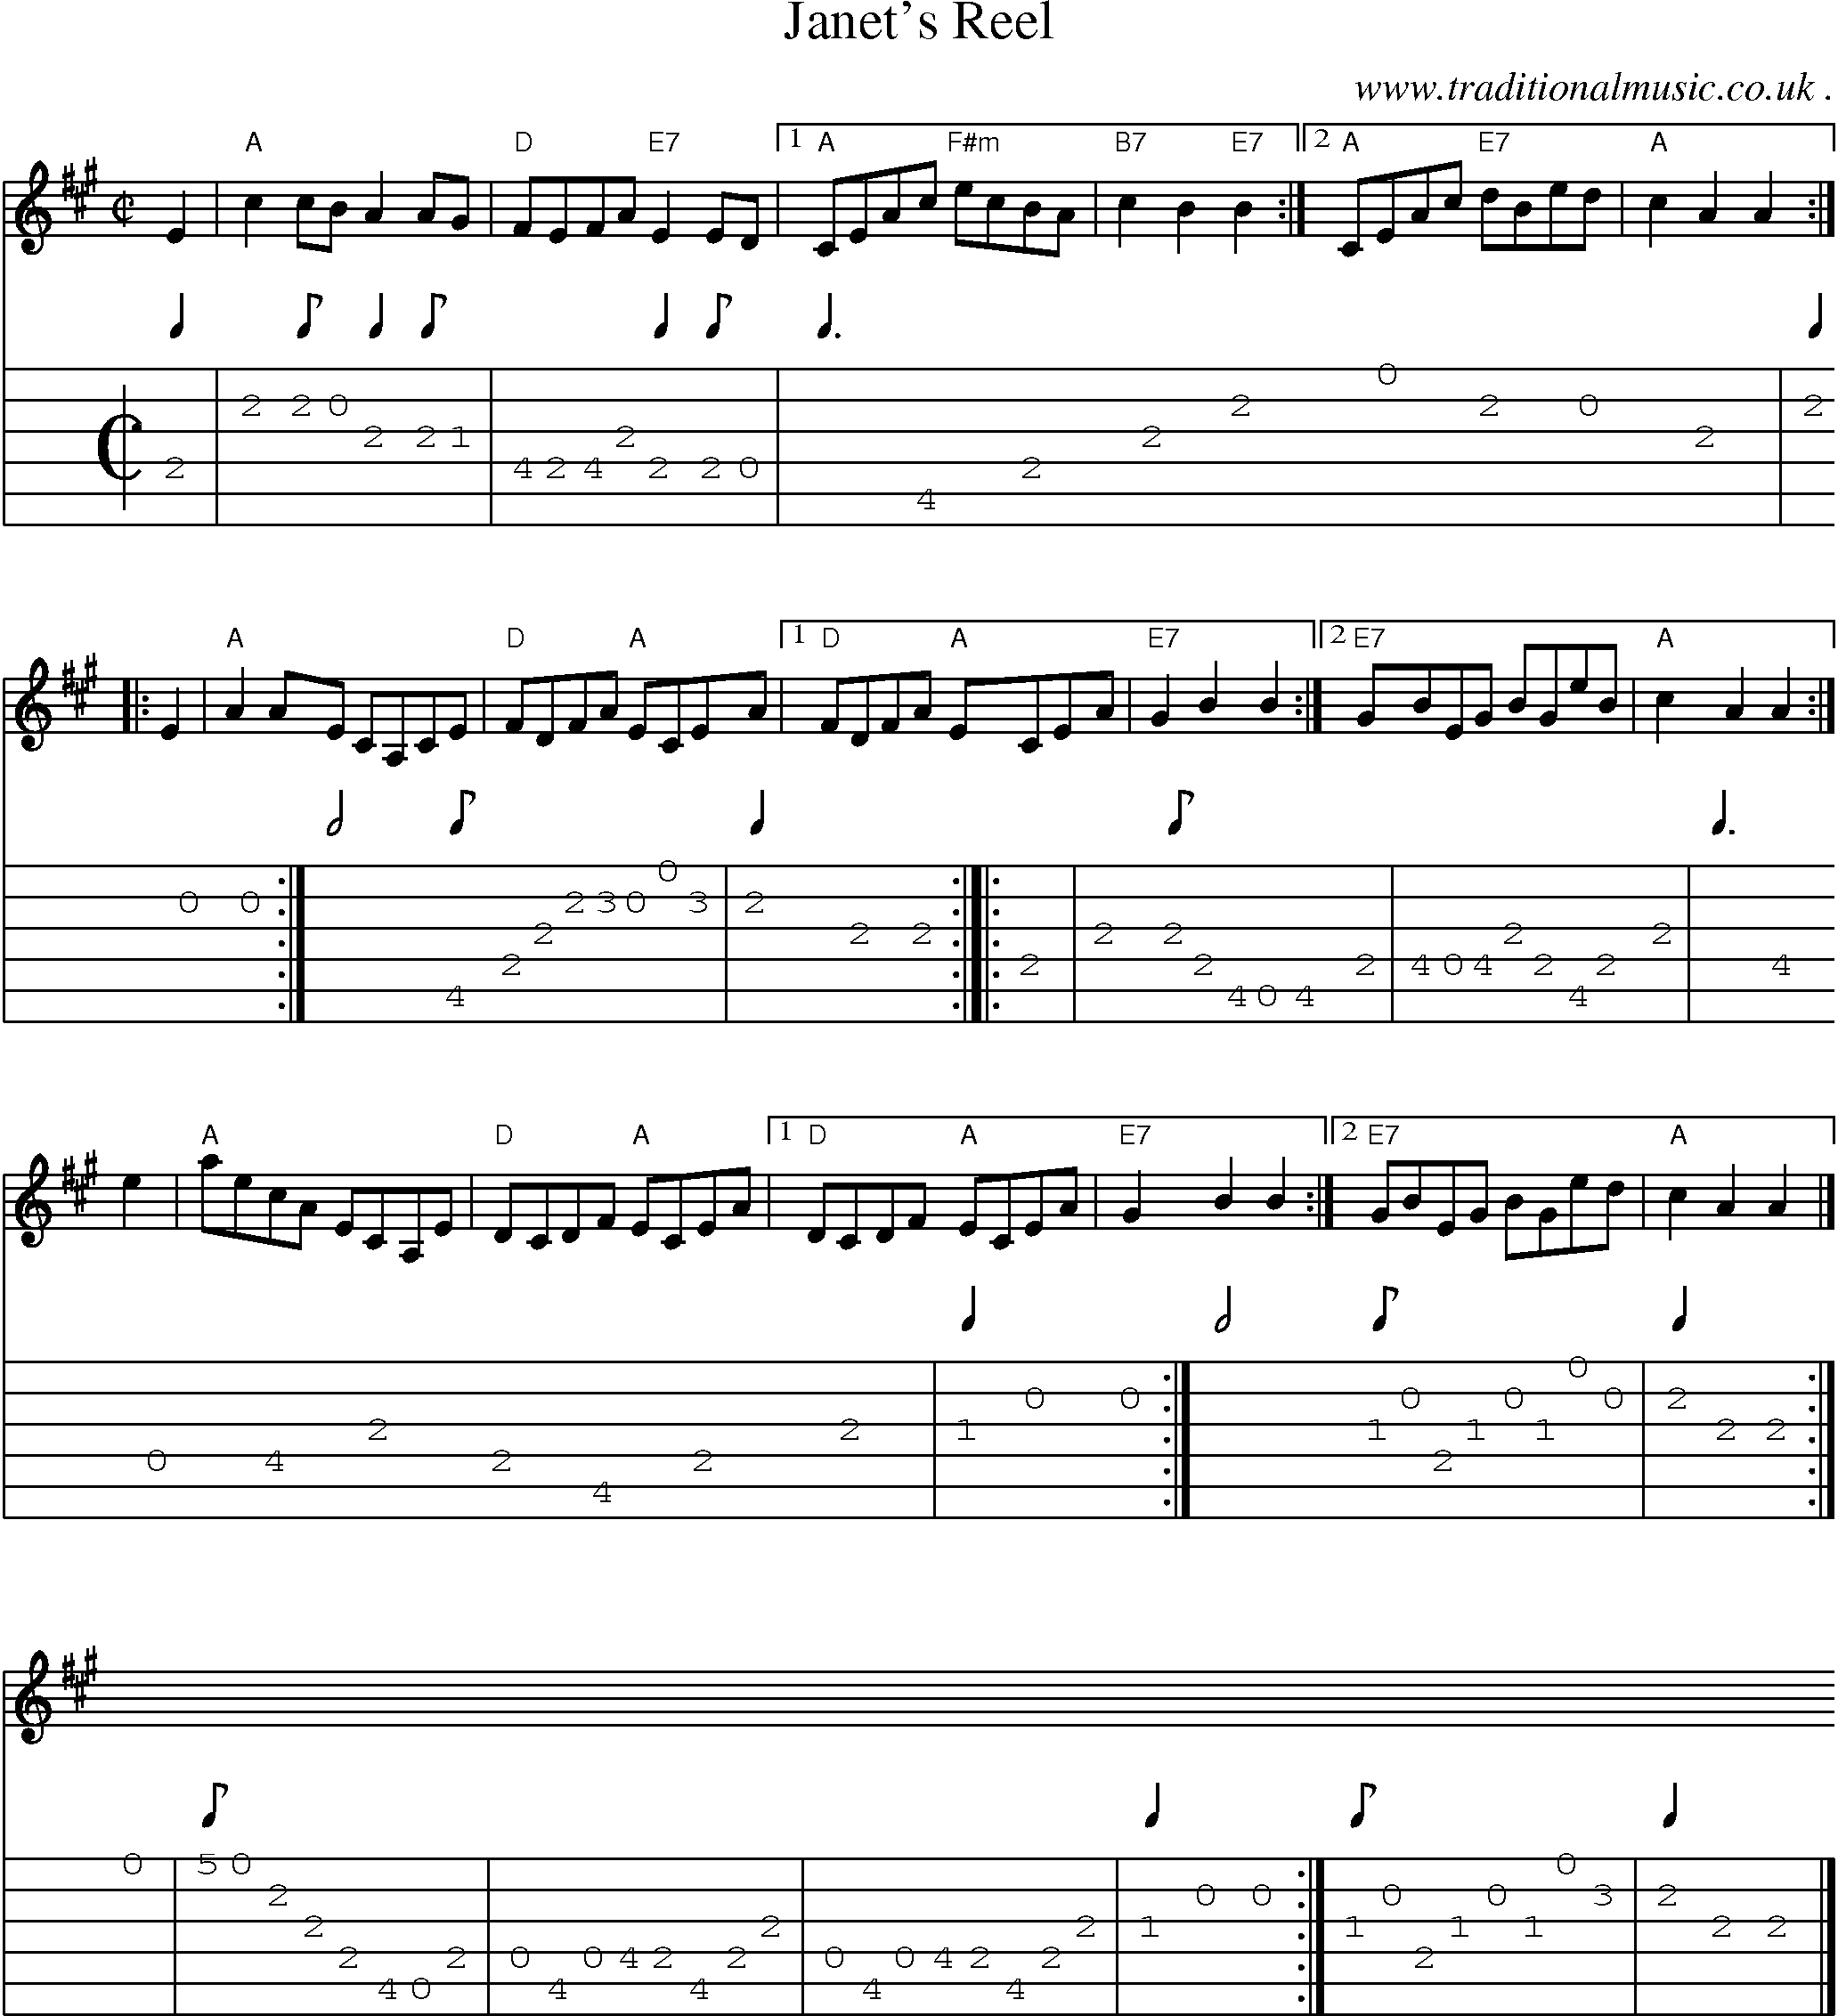 Sheet-music  score, Chords and Guitar Tabs for Janets Reel